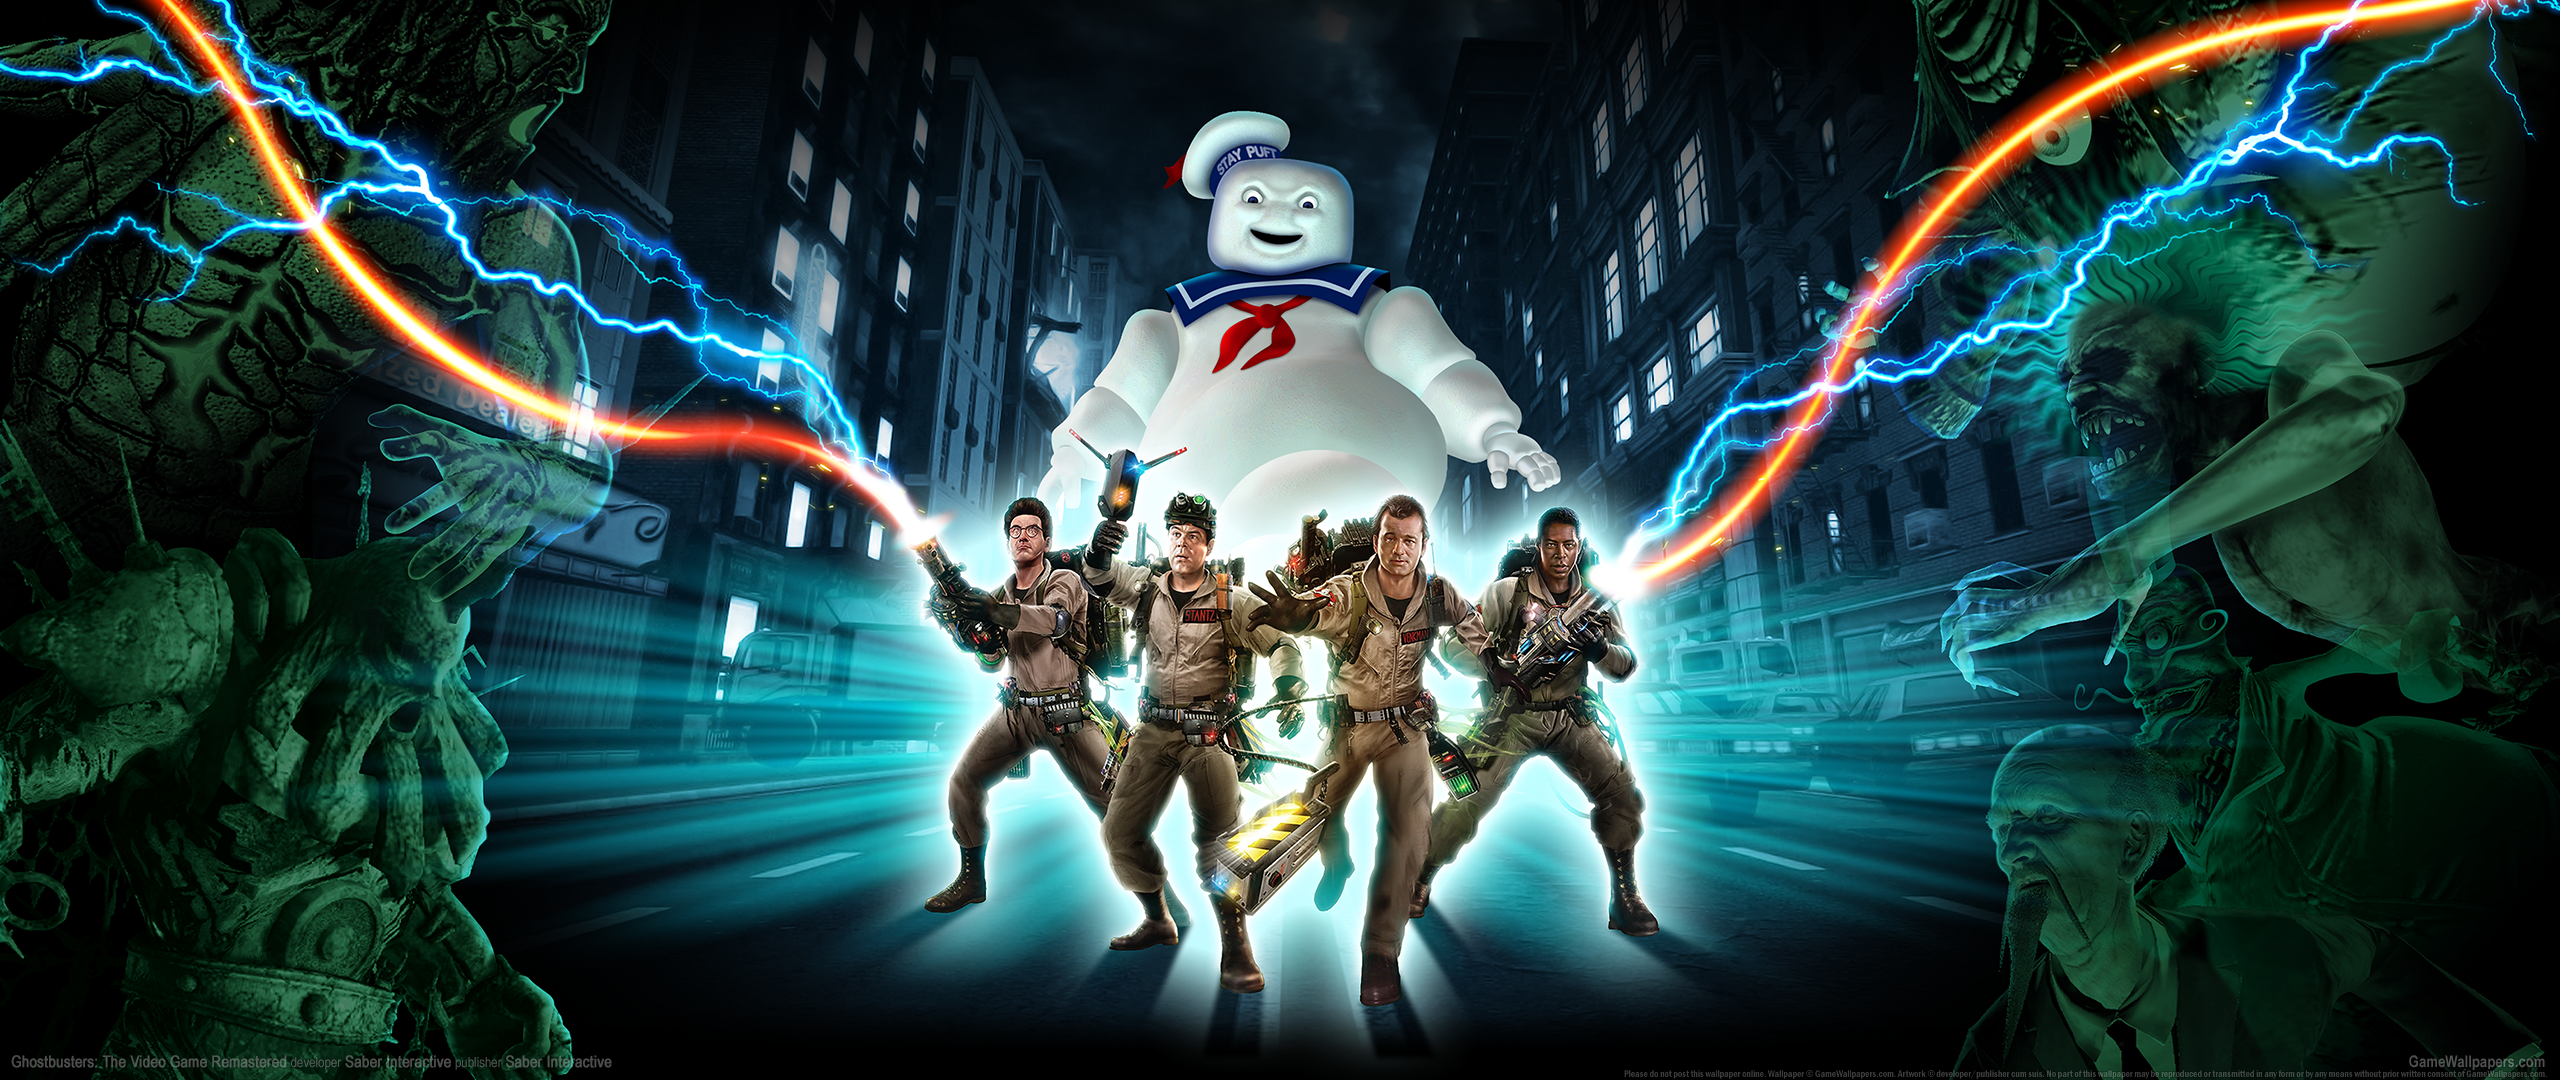 Ghostbusters: The Video Game Remastered 2560x1080 fond d'cran 01